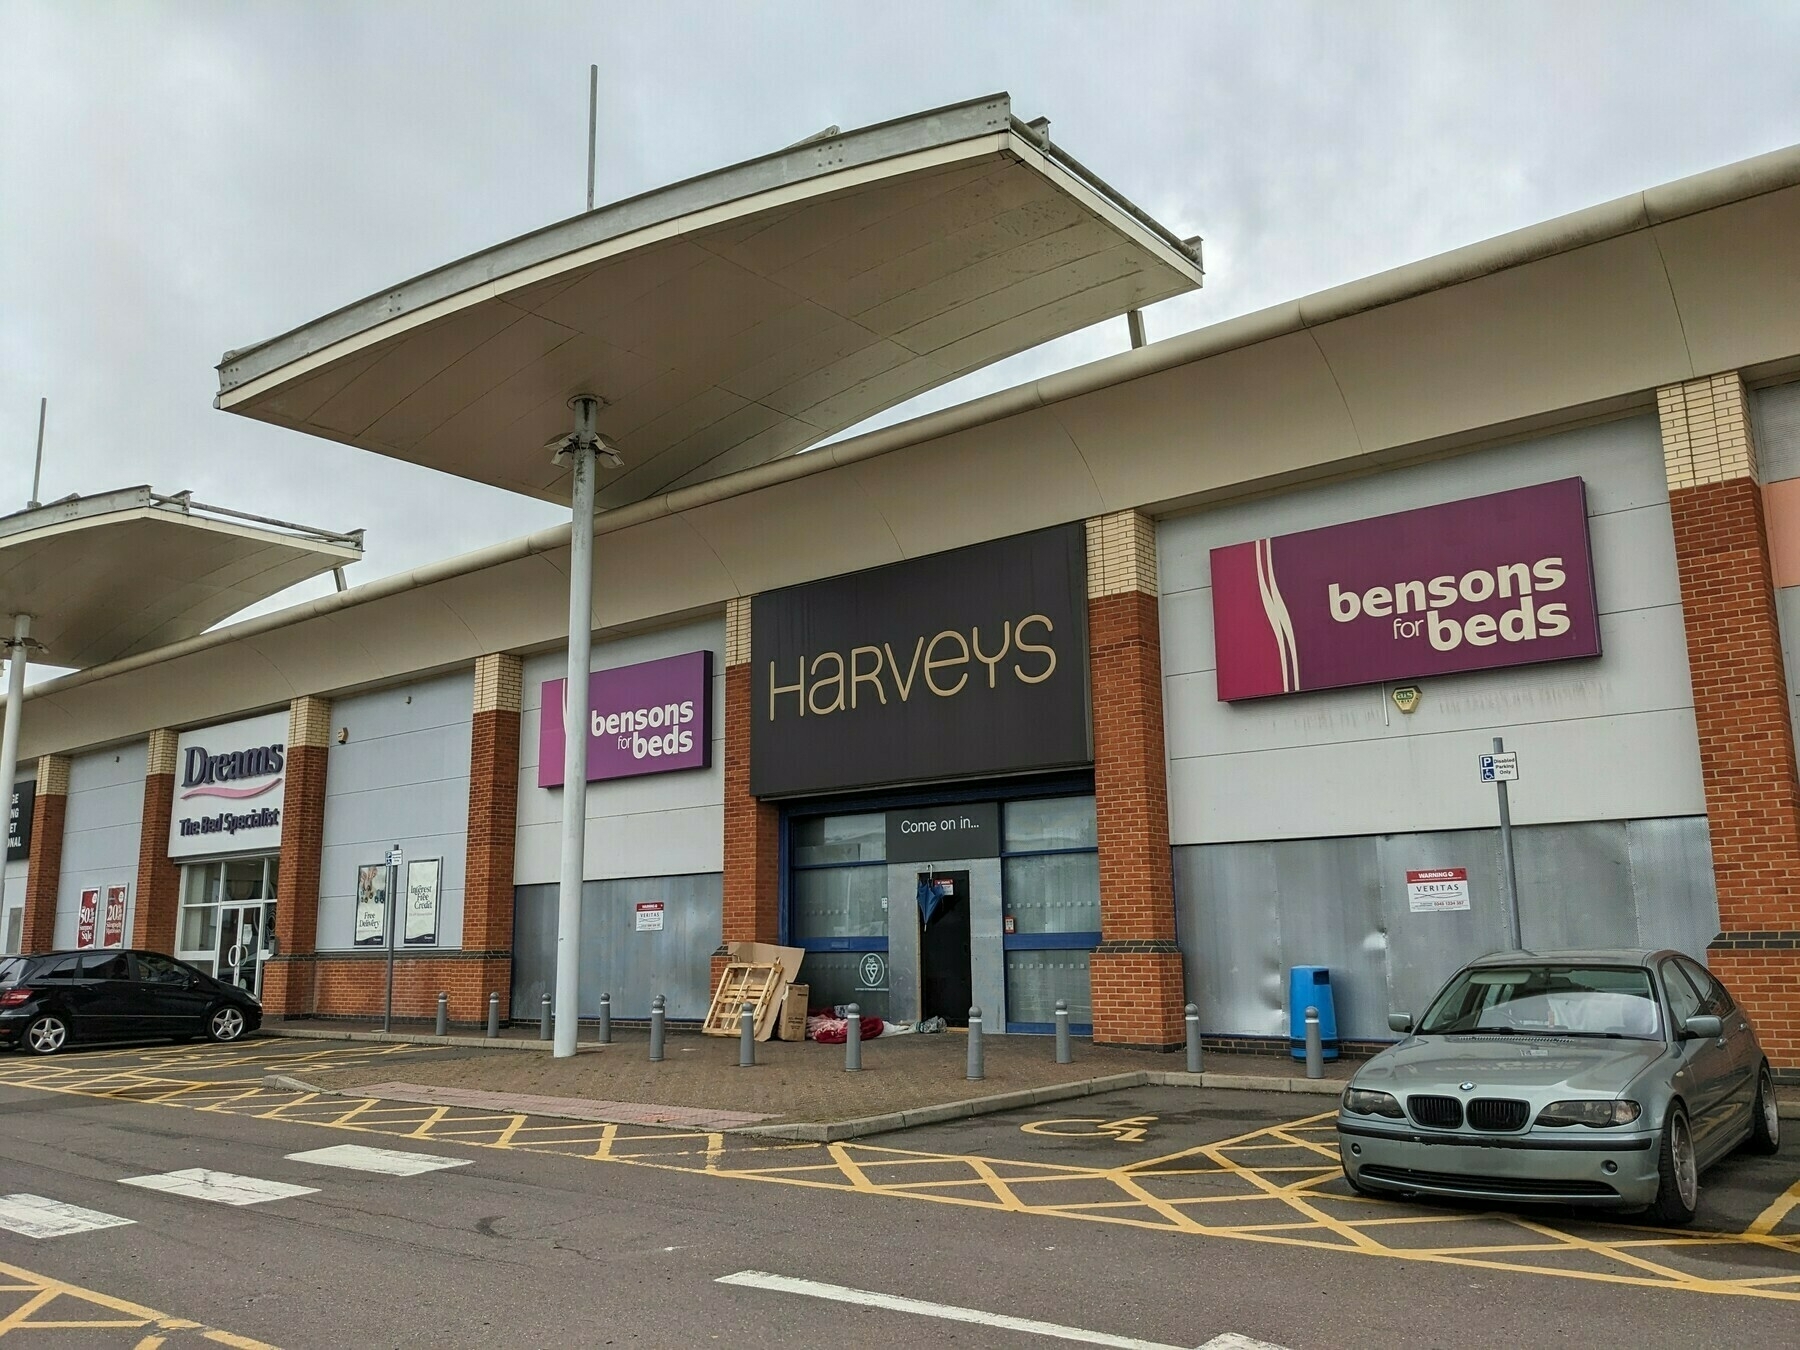 A homeless person's makeshift bed and shelter outside a trading estate premises with apposite signs above the closed doors: Harveys "Come on in..."; Bensons "for beds"; and Dreams "The Bed Specialist".